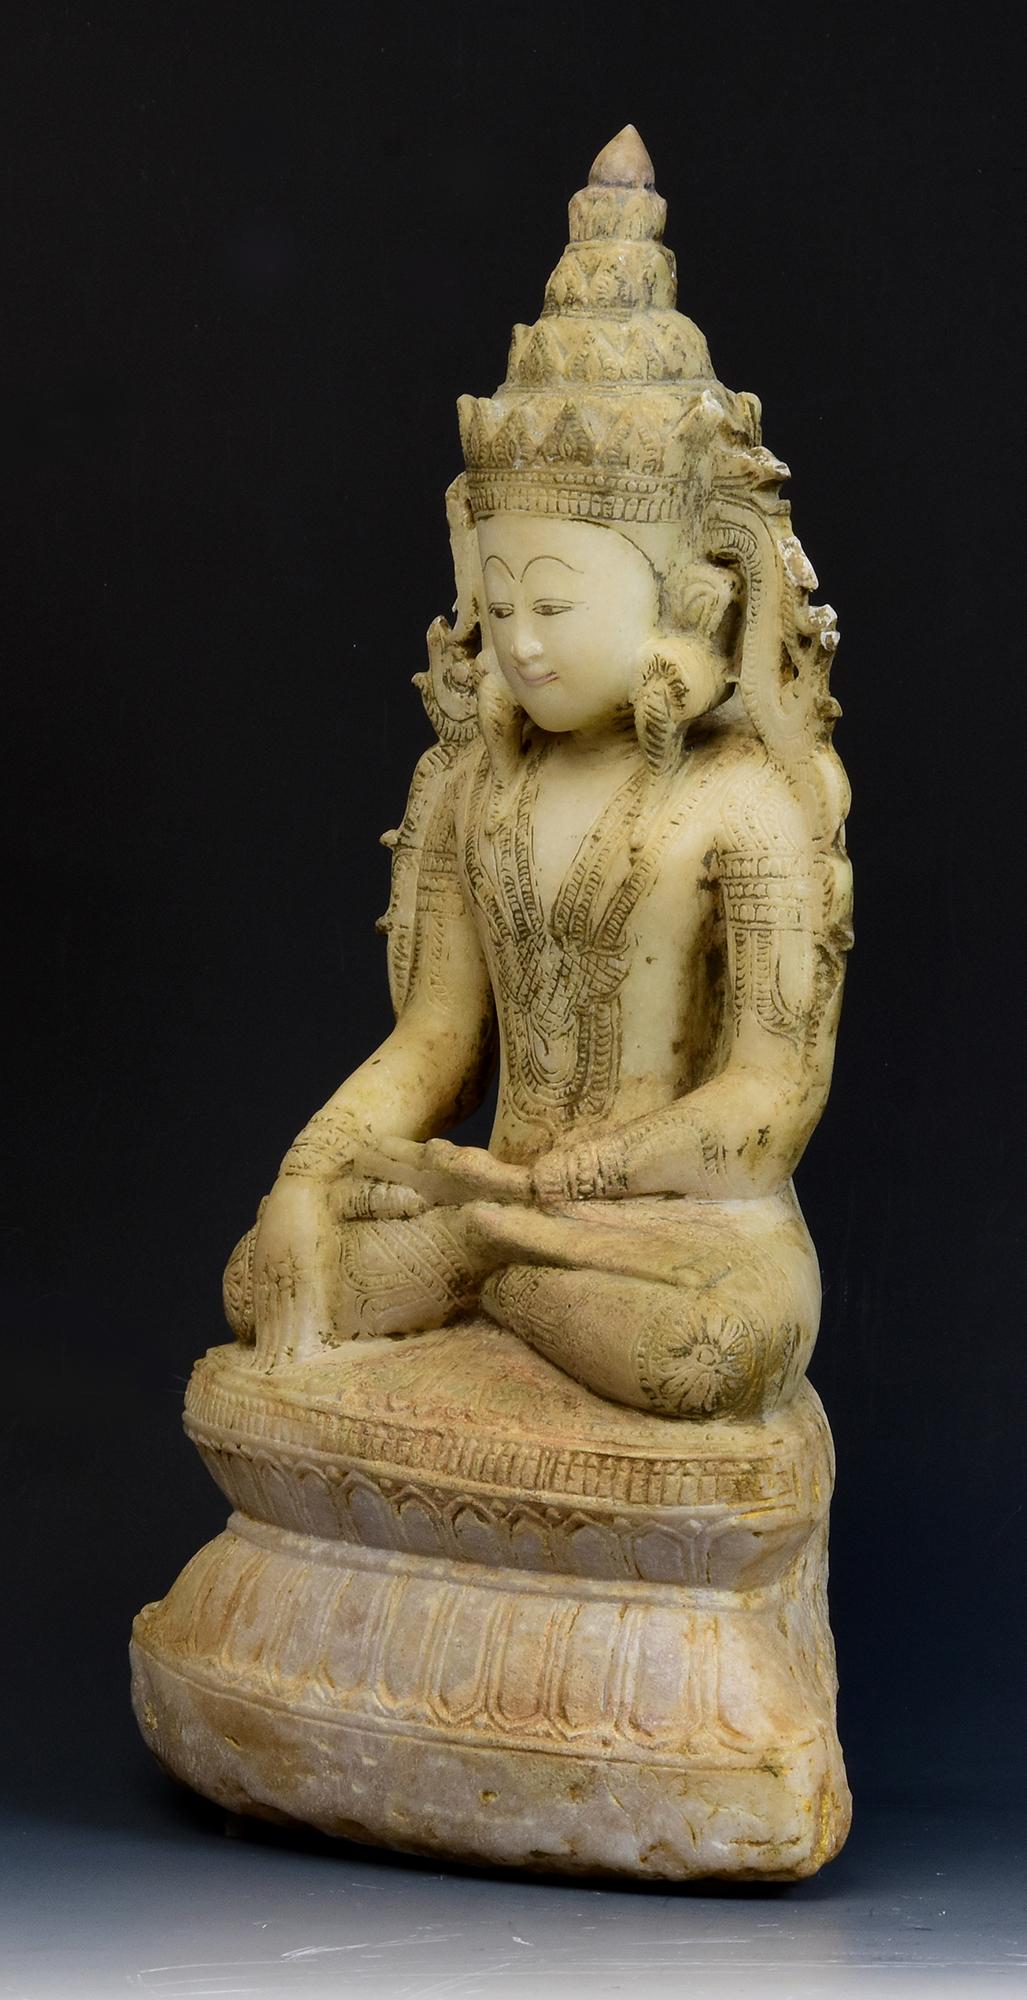 18th C., Shan, Rare Antique Burmese Alabaster Marble Seated King Buddha Statue For Sale 6